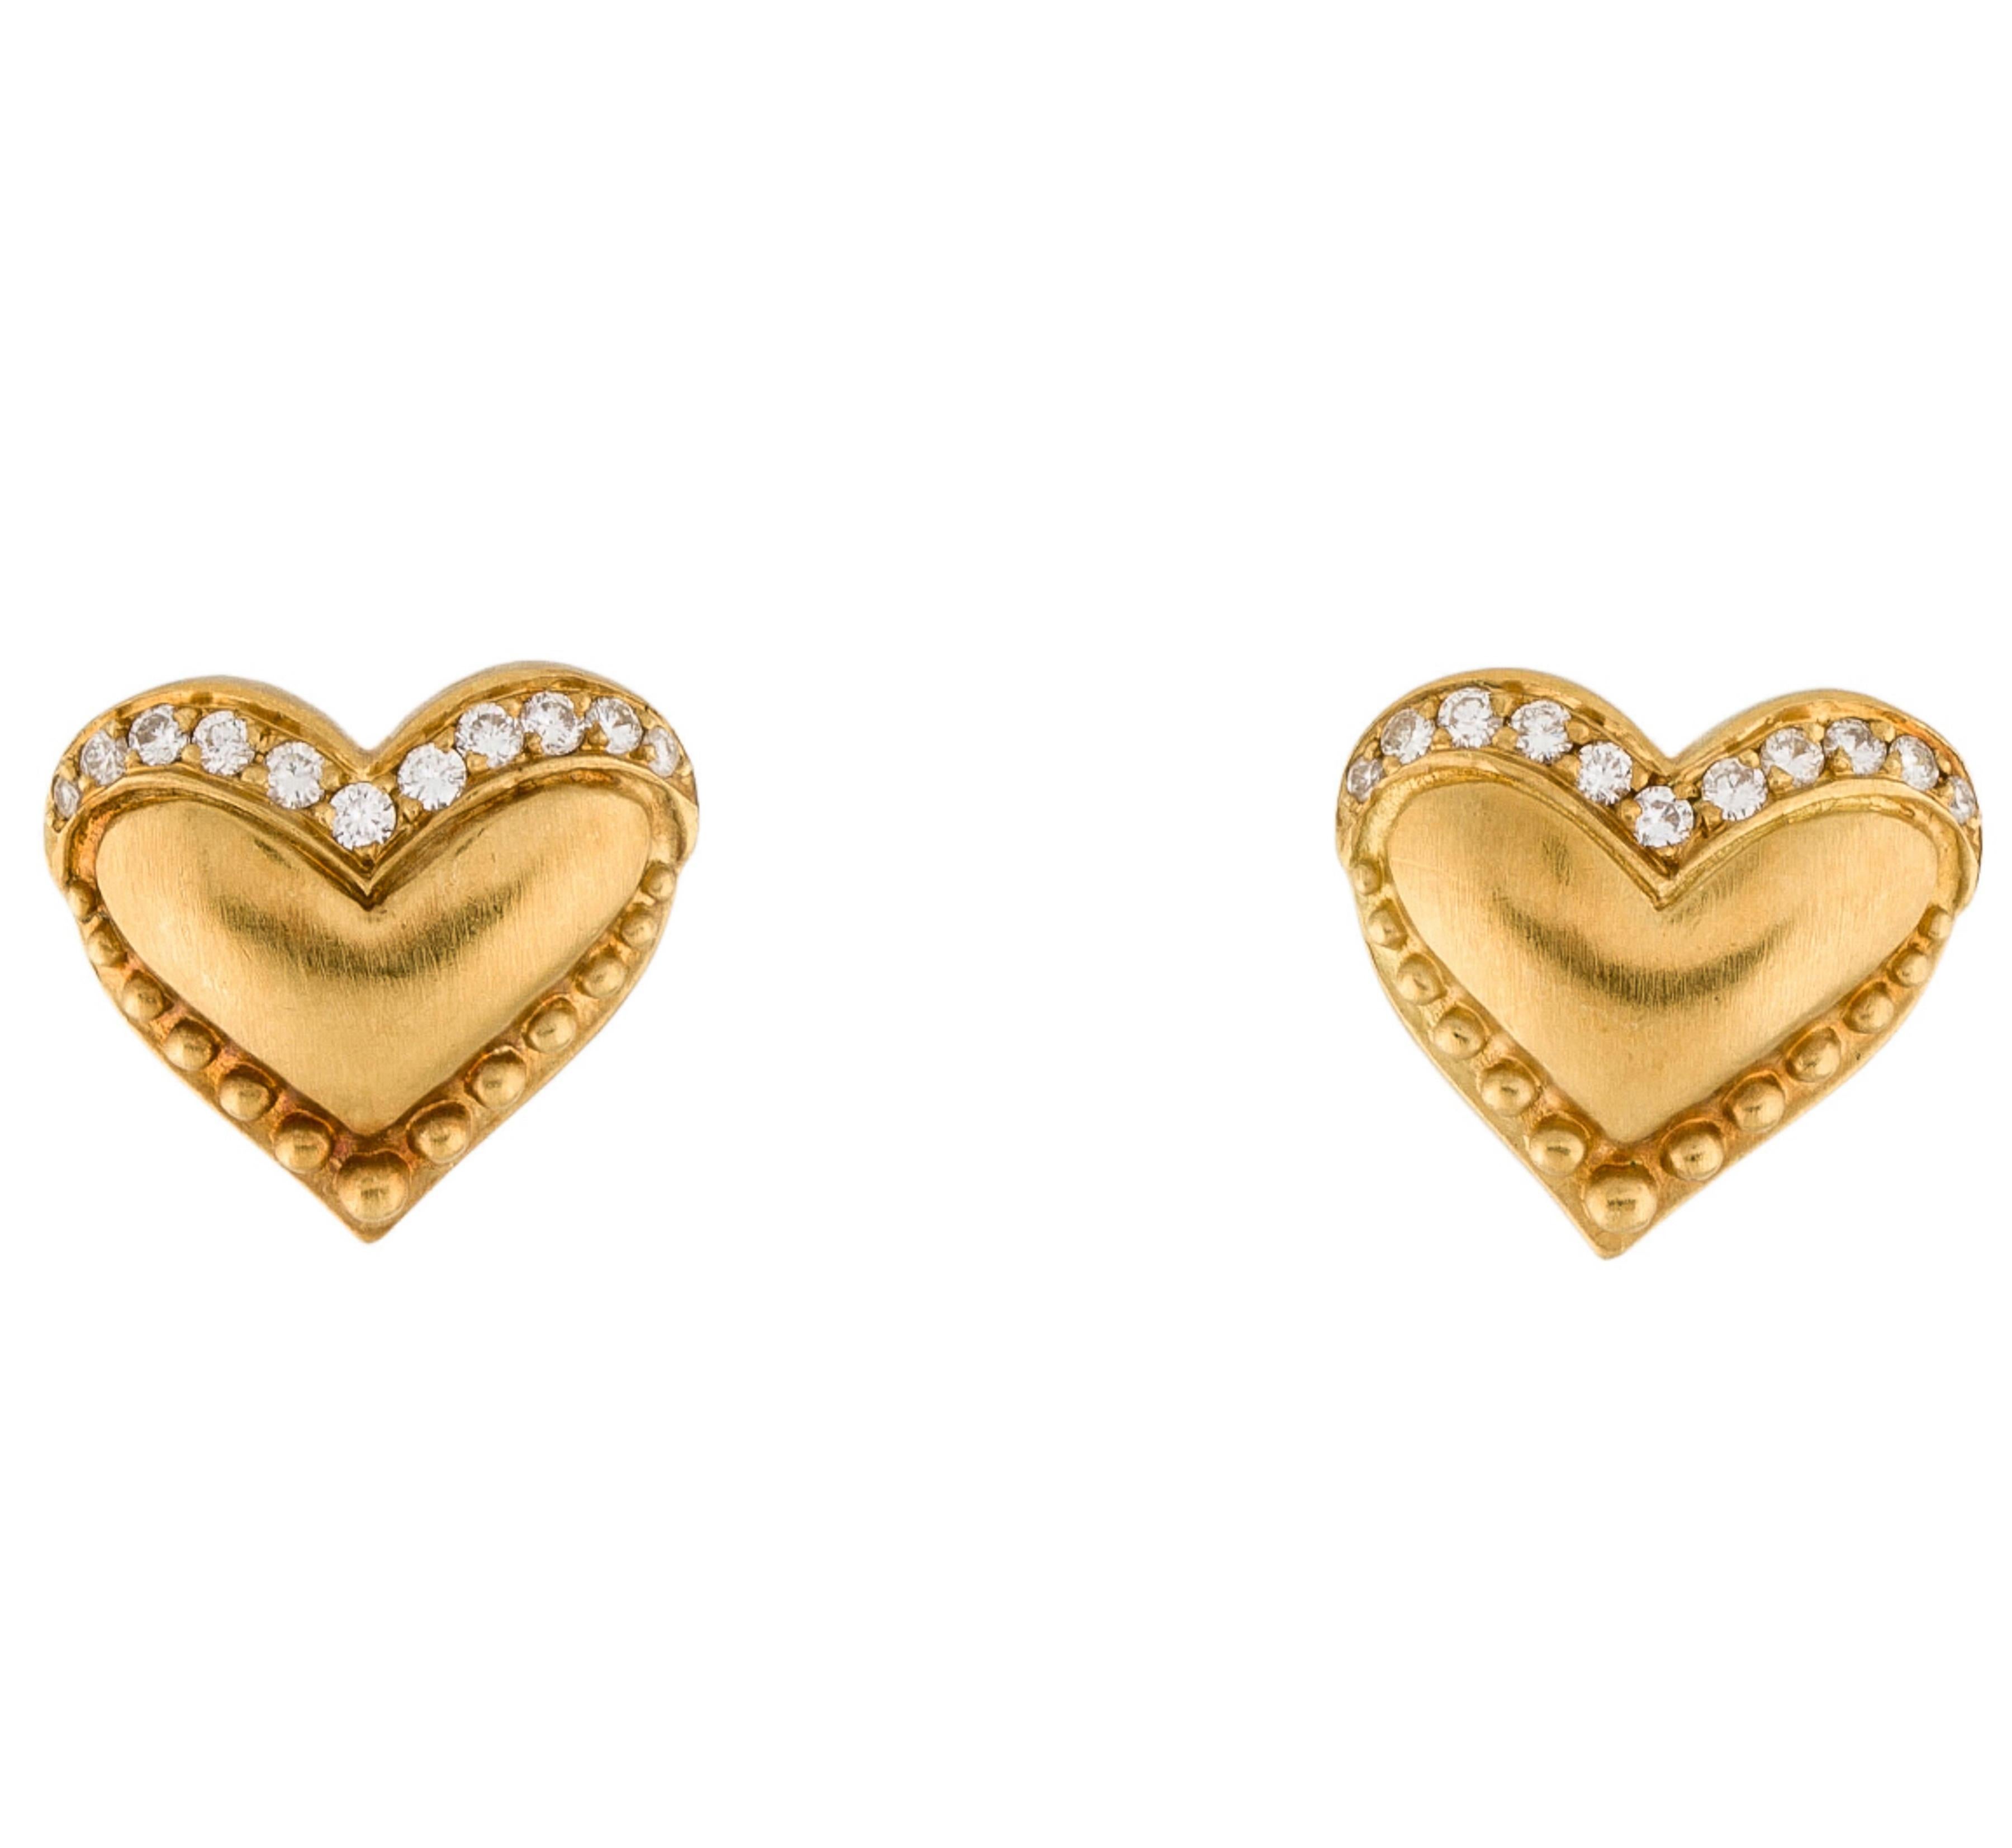 18K DIAMOND HEART STUD EARRINGS

18K Yellow Gold

Signature: MH or HW
Weight (g): 11.2

Diamond - Carat Weight: 0.44
Stone Count: 22

Excellent Vintage Condition

Measurements: Length 0.6